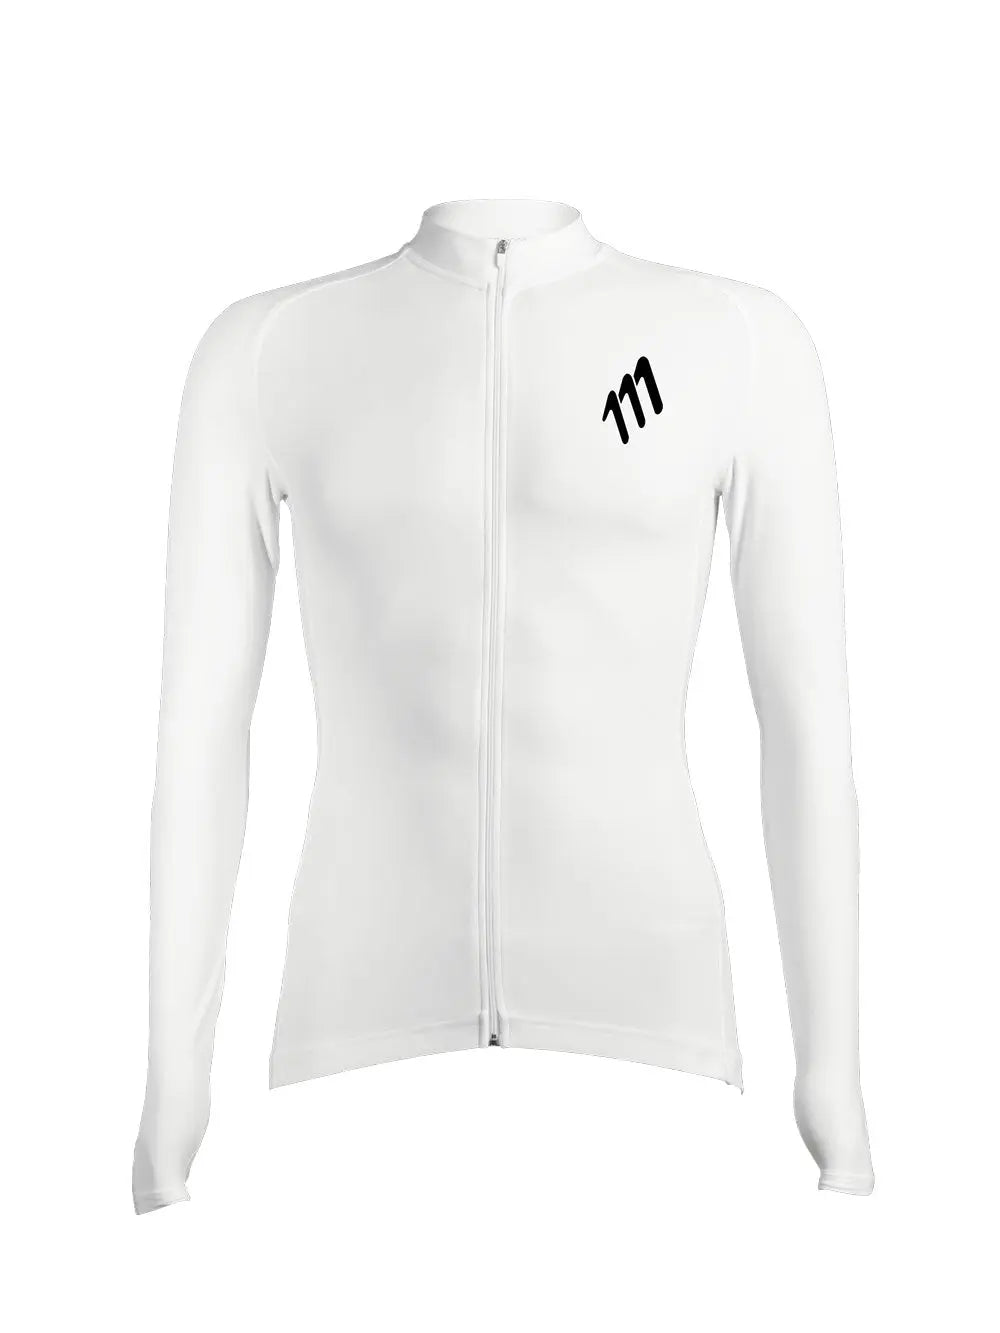 Jersey essentials long sleeve white women 111 Cientonce